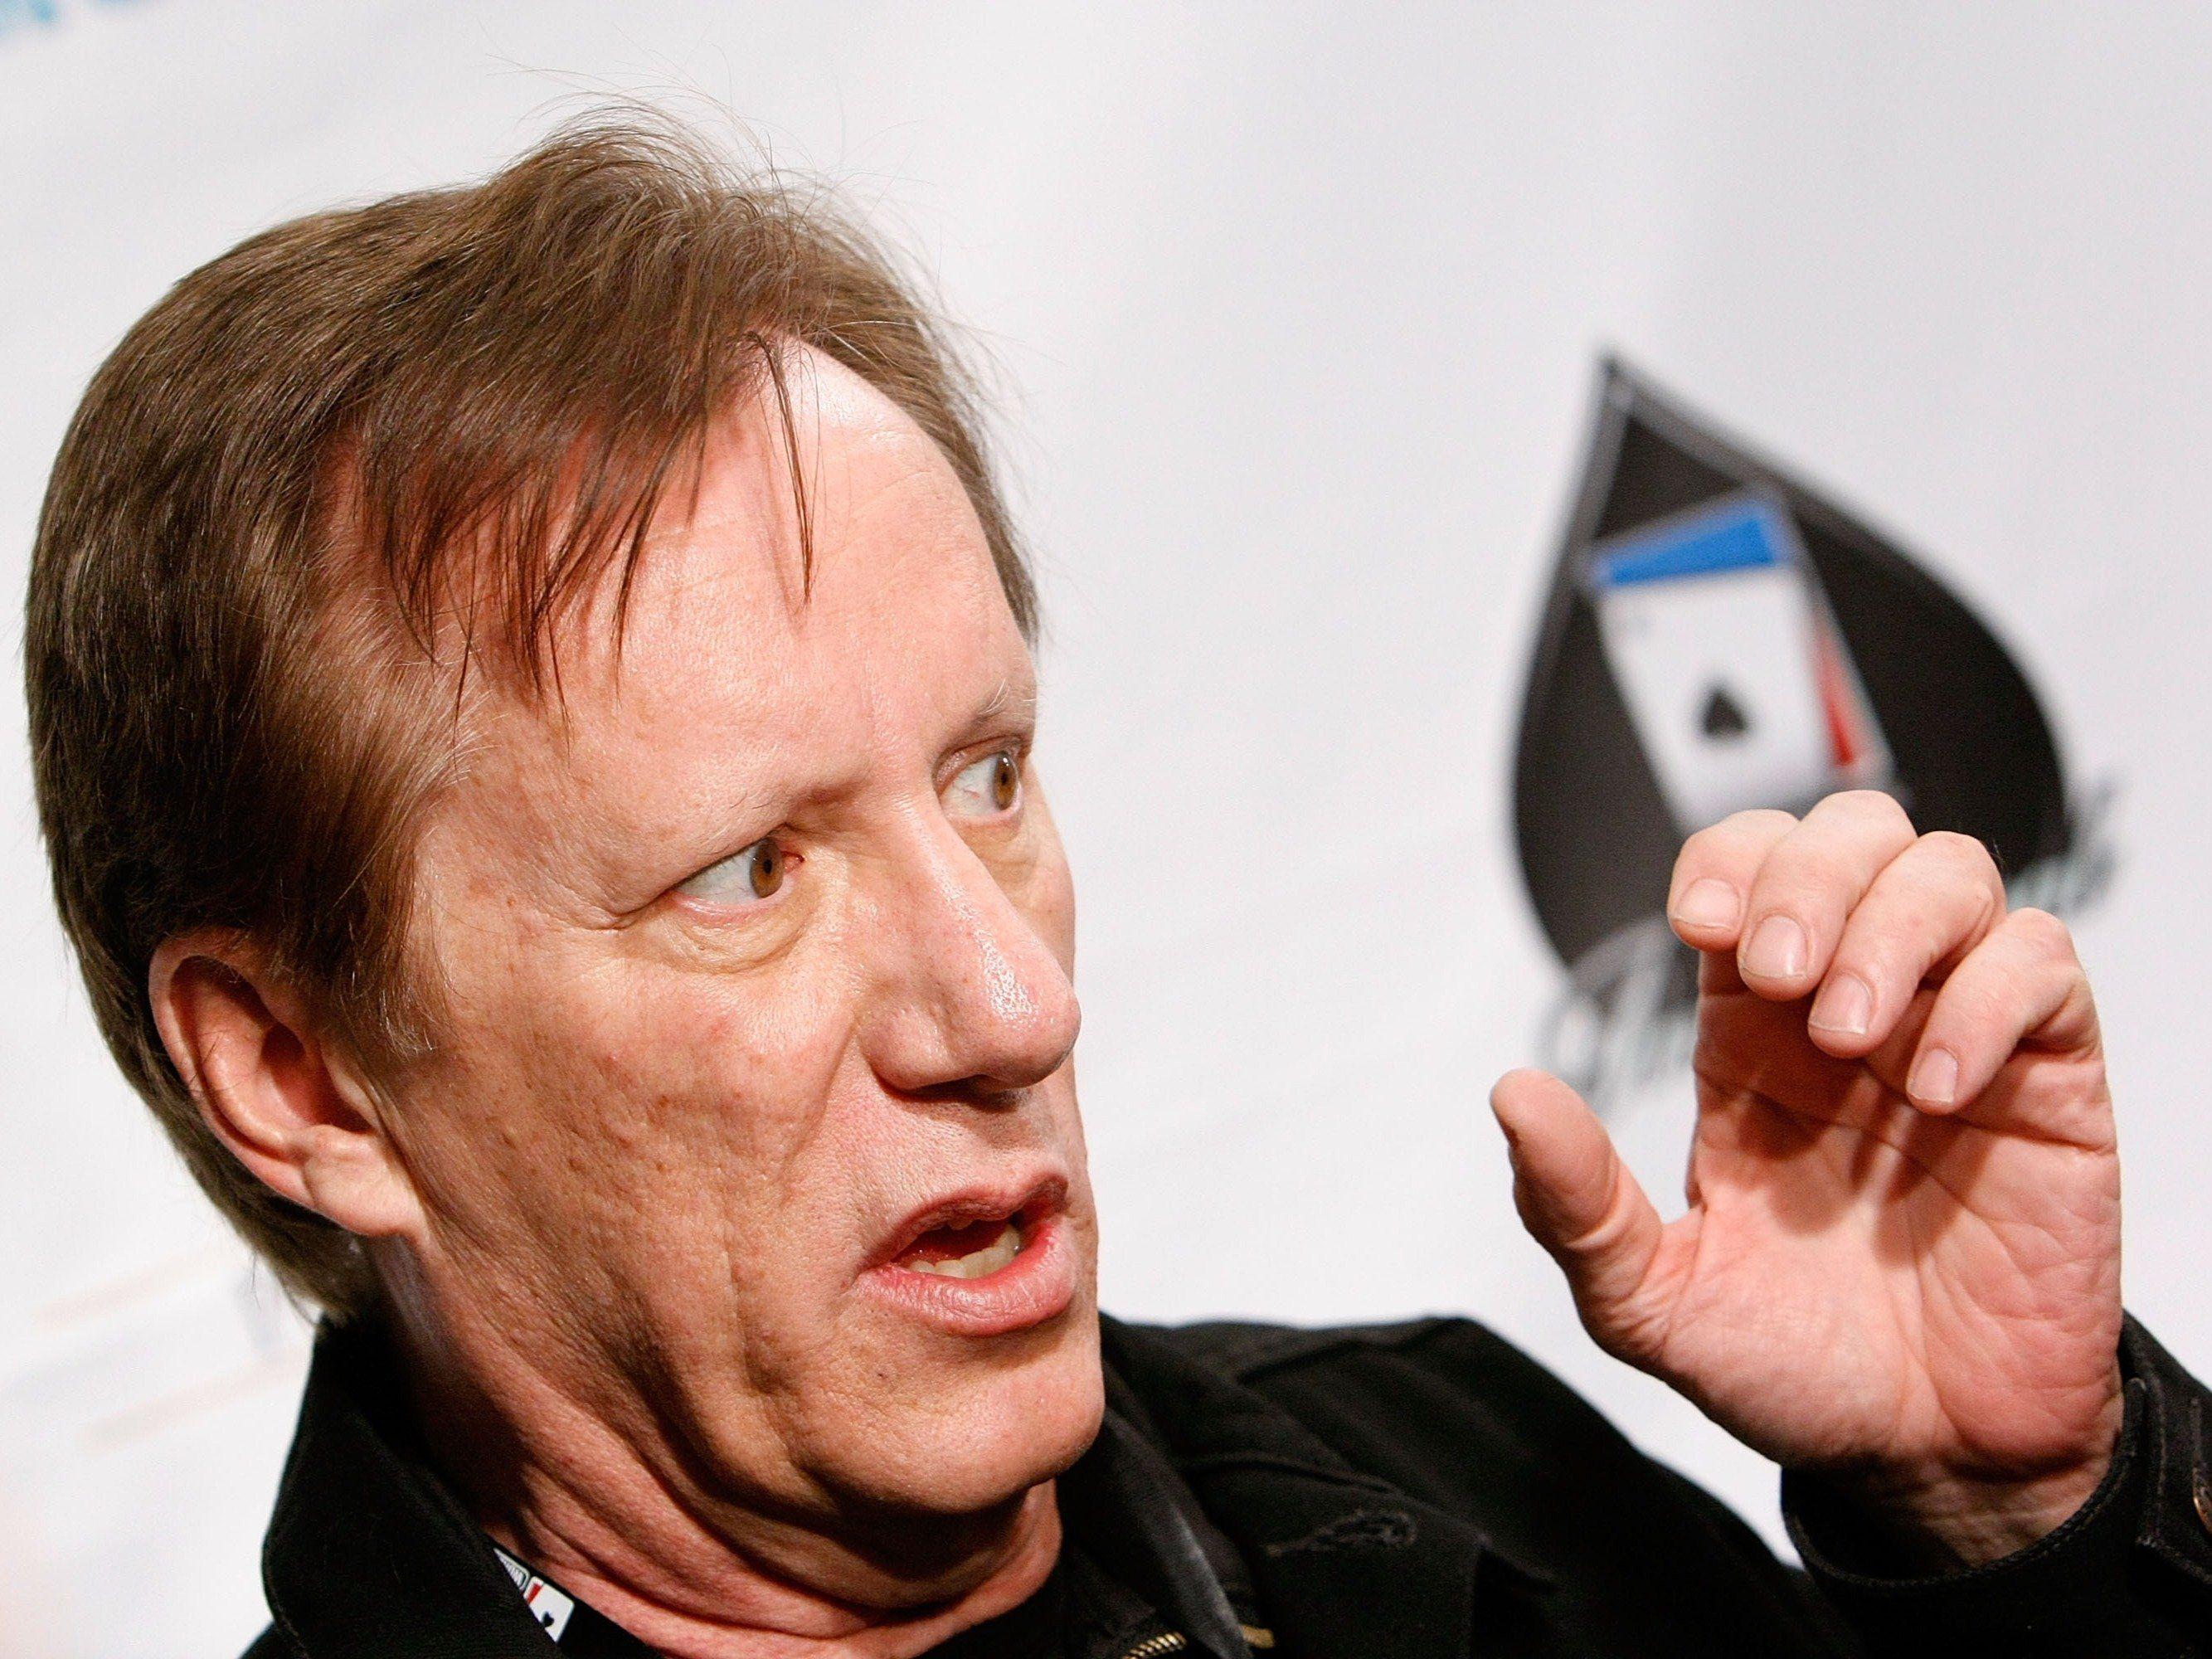 James Woods Wallpaper High Quality